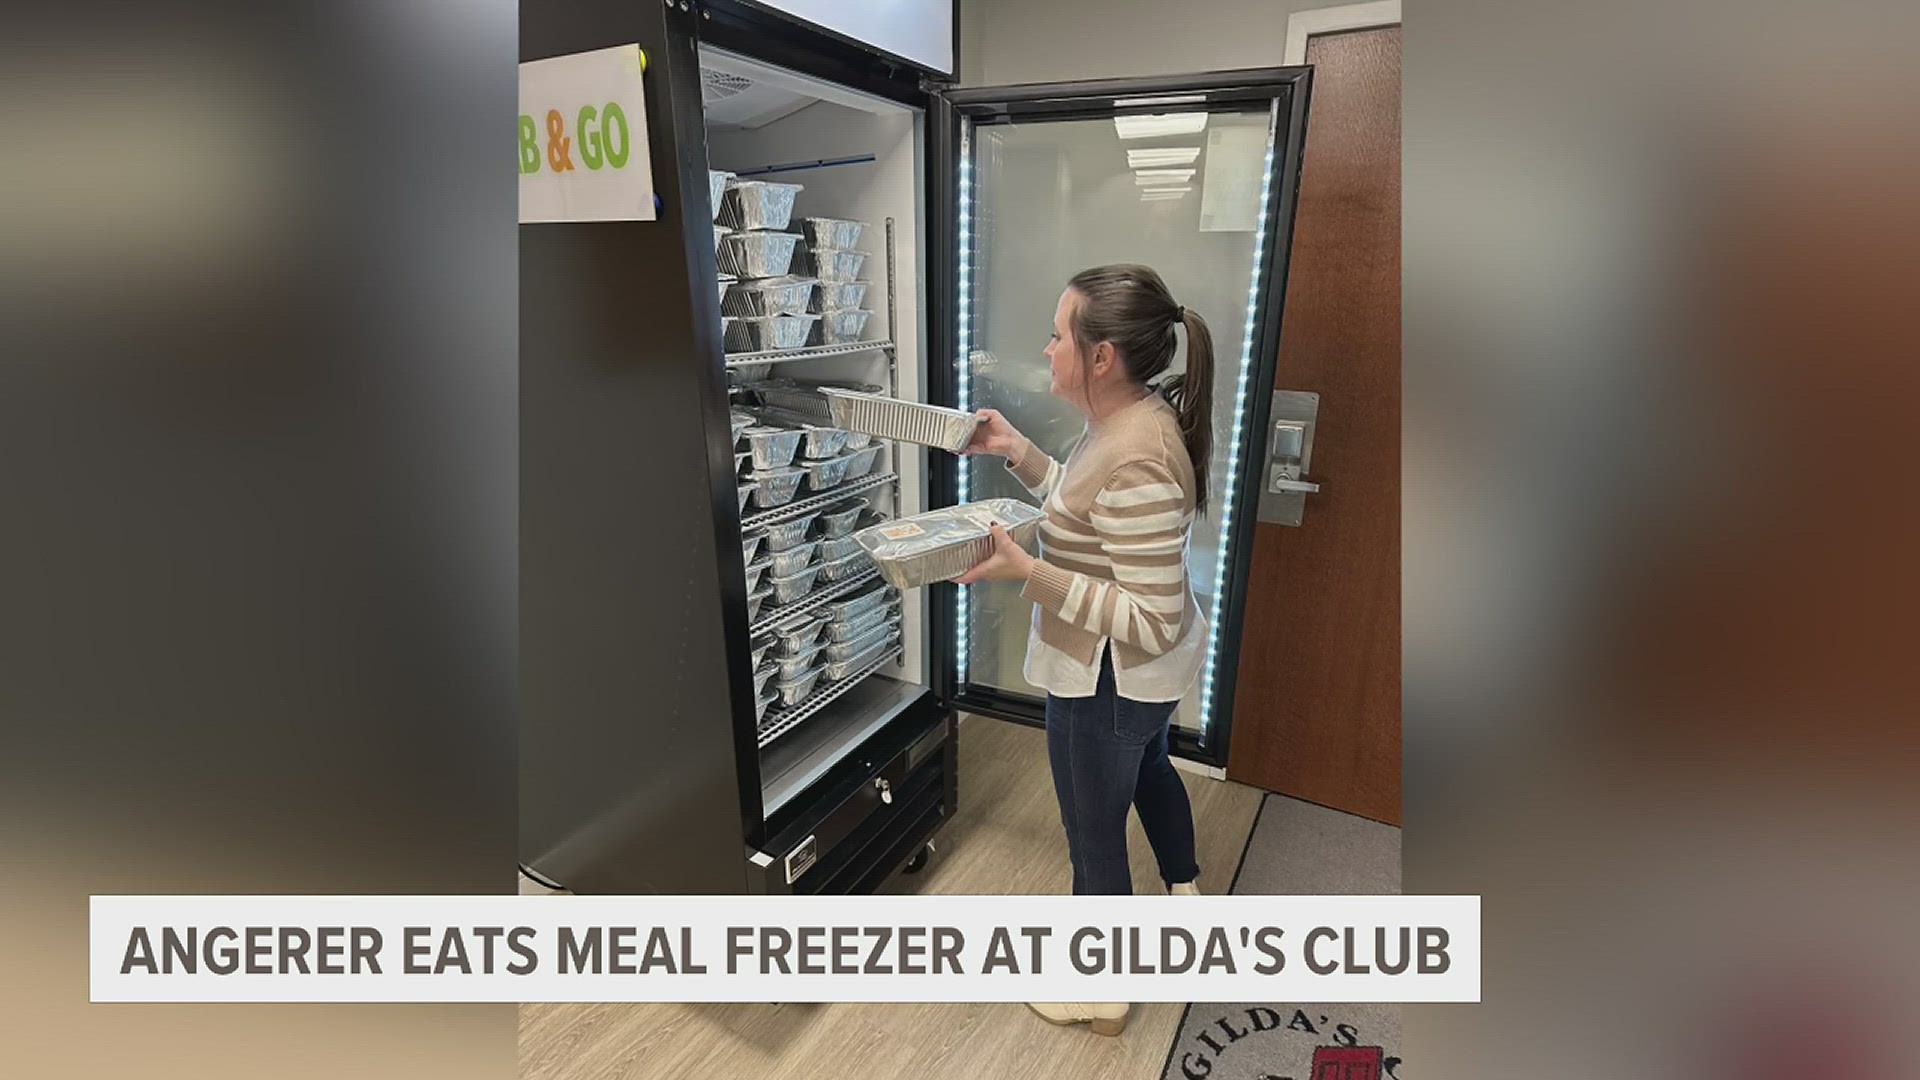 Gilda's Club Quad Cities and Angerer Eats are extending a hand to cancer patients and their loved ones by providing them with free meals.